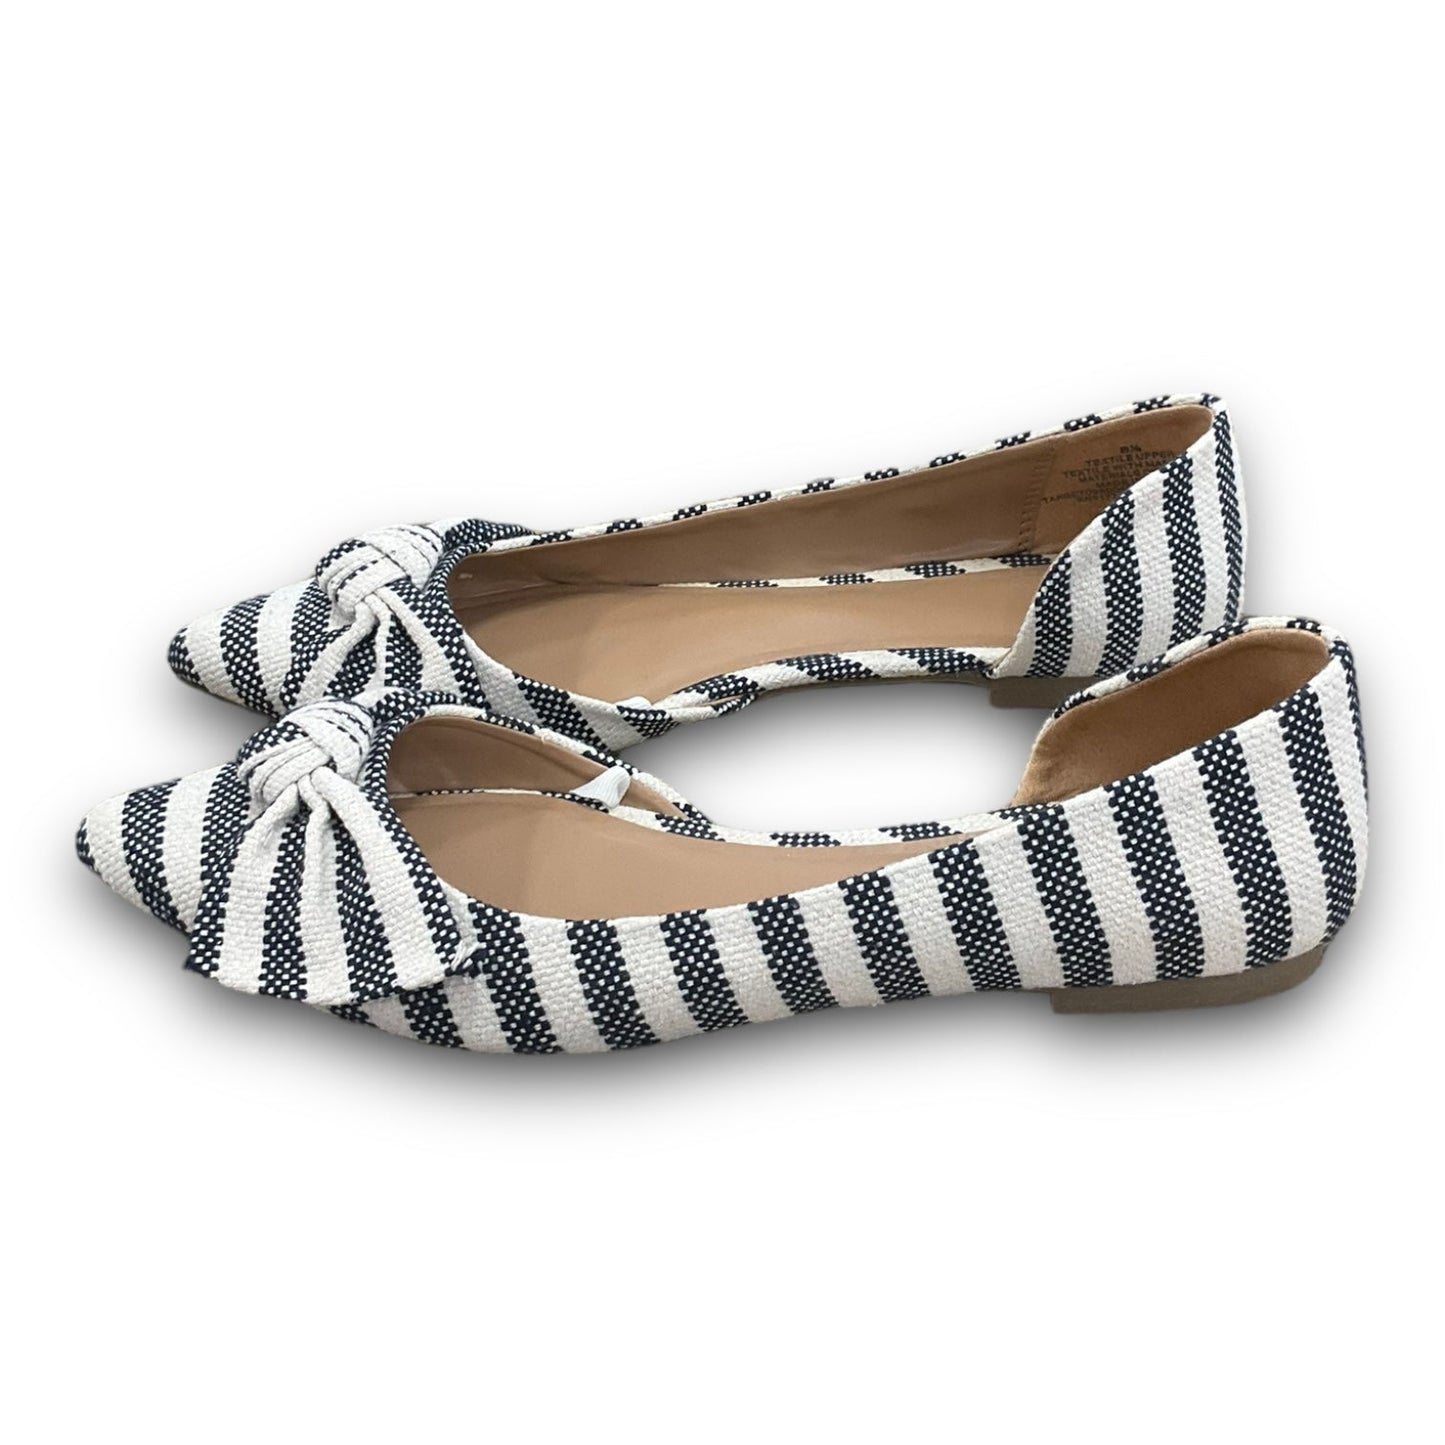 Striped Pattern Shoes Flats A New Day, Size 8.5